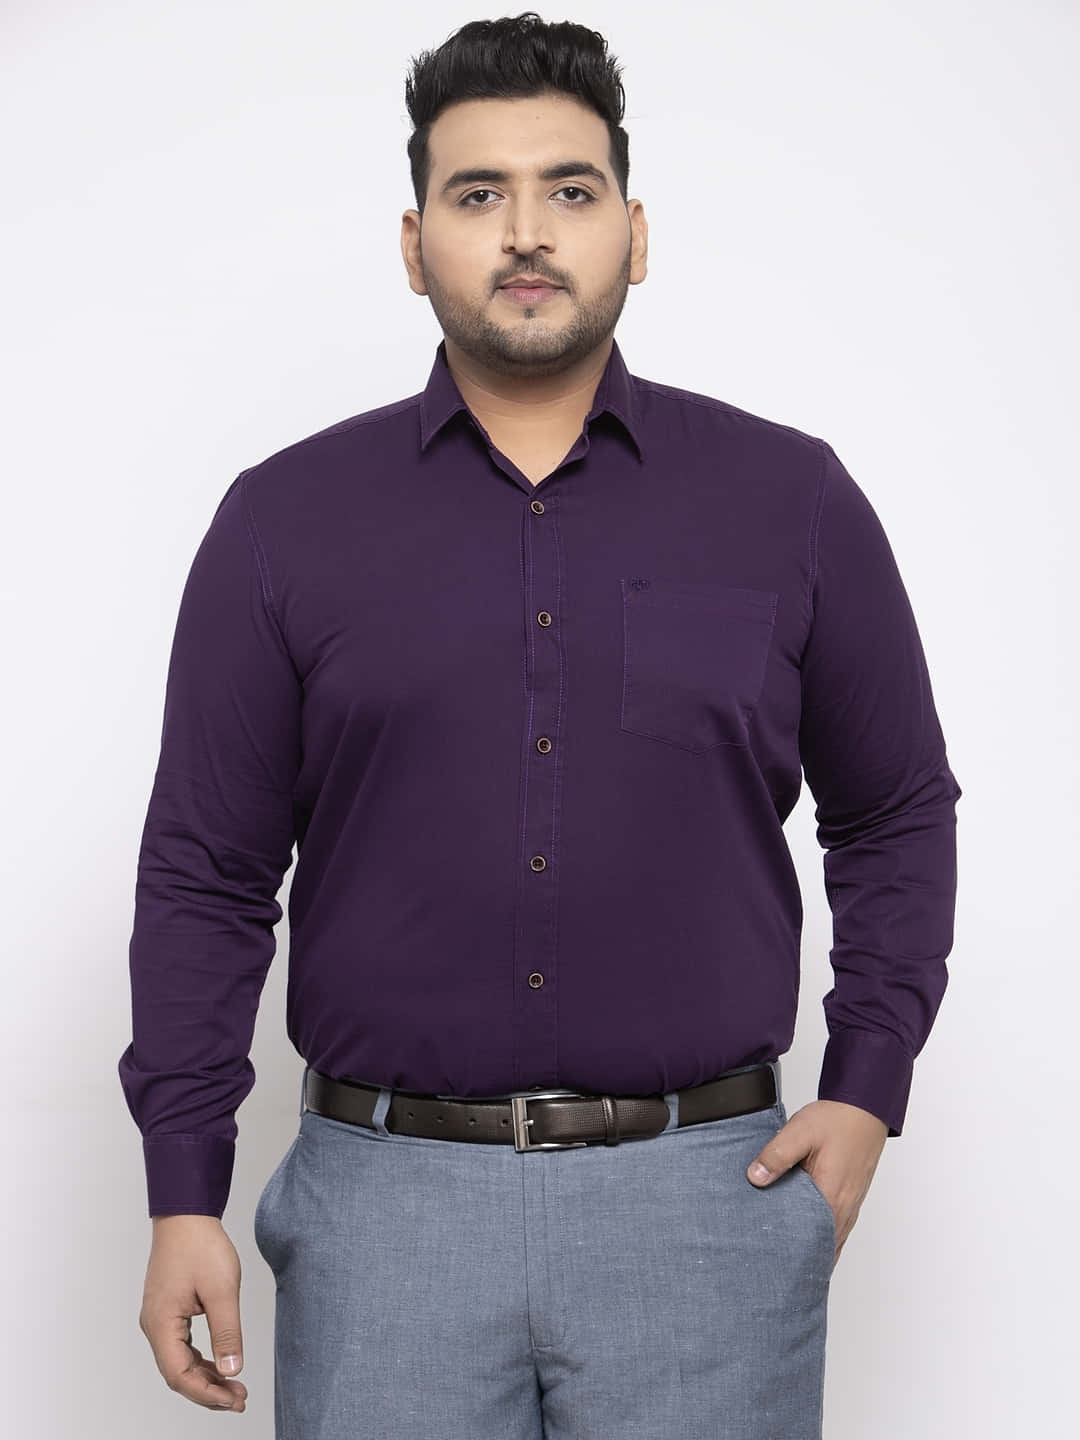 Add a statement to your style with this elegant purple shirt Wallpaper